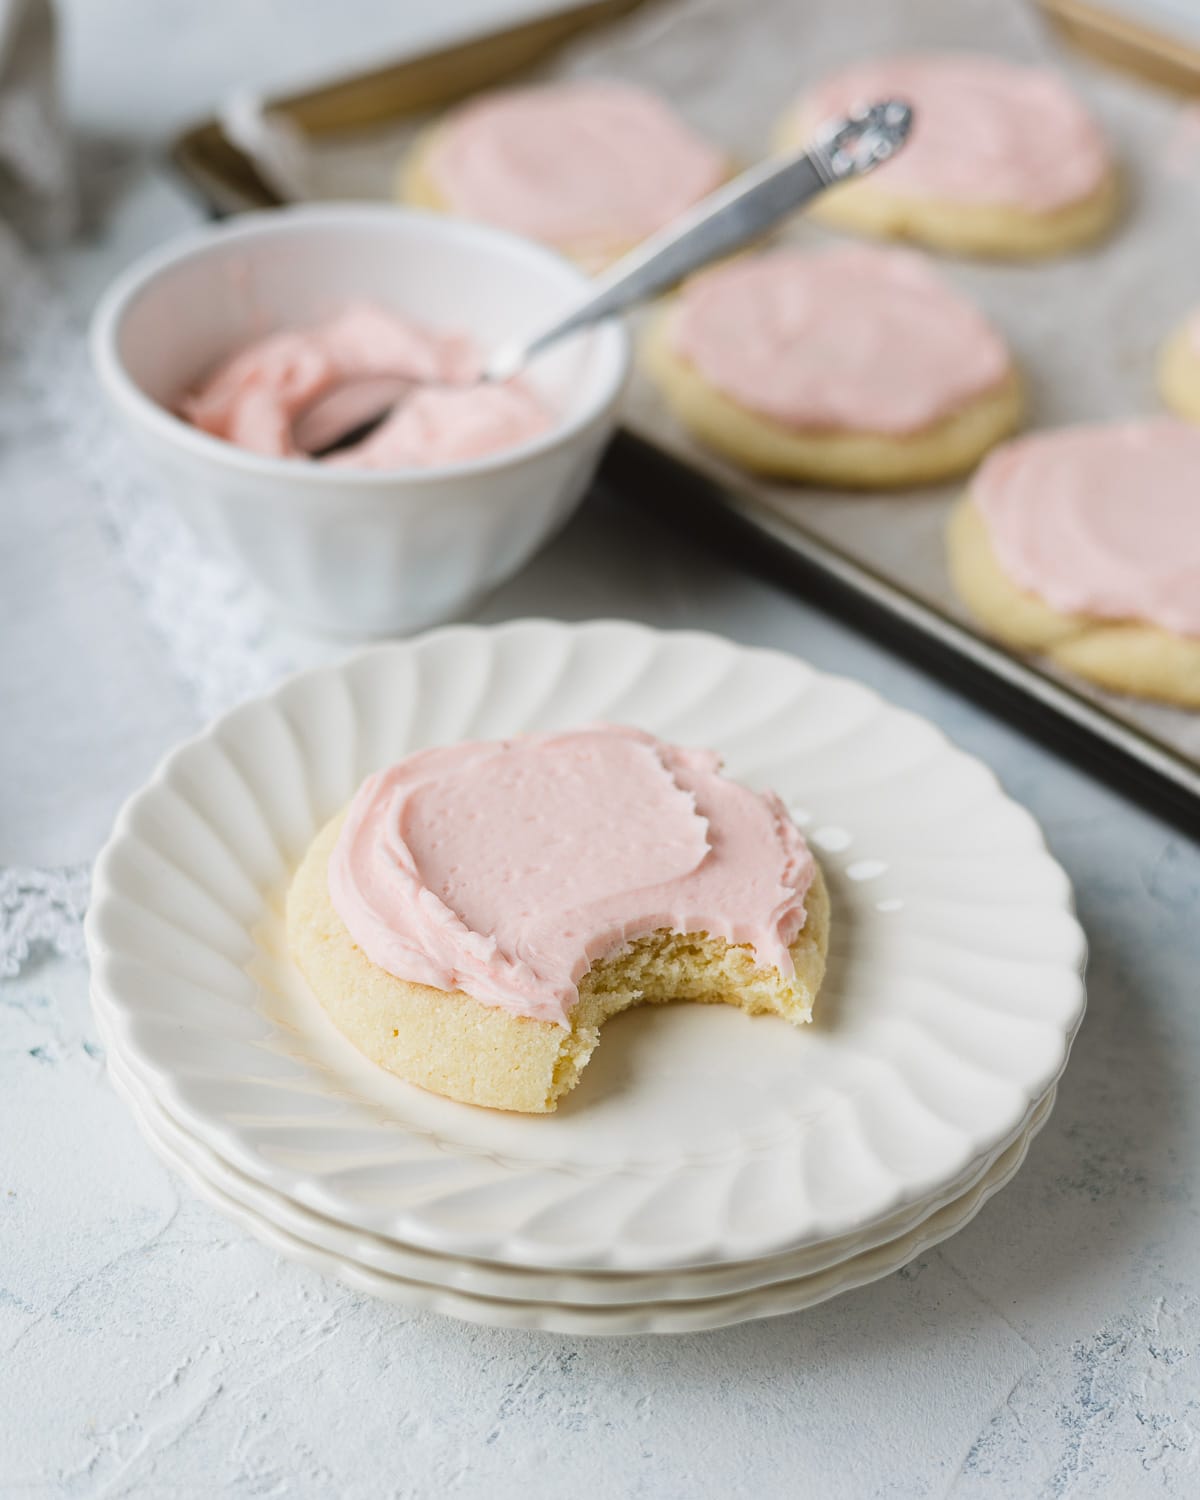 A Crumbl copycat Pink Sugar Cookie with a bite removed on a stack of small scalloped plates.